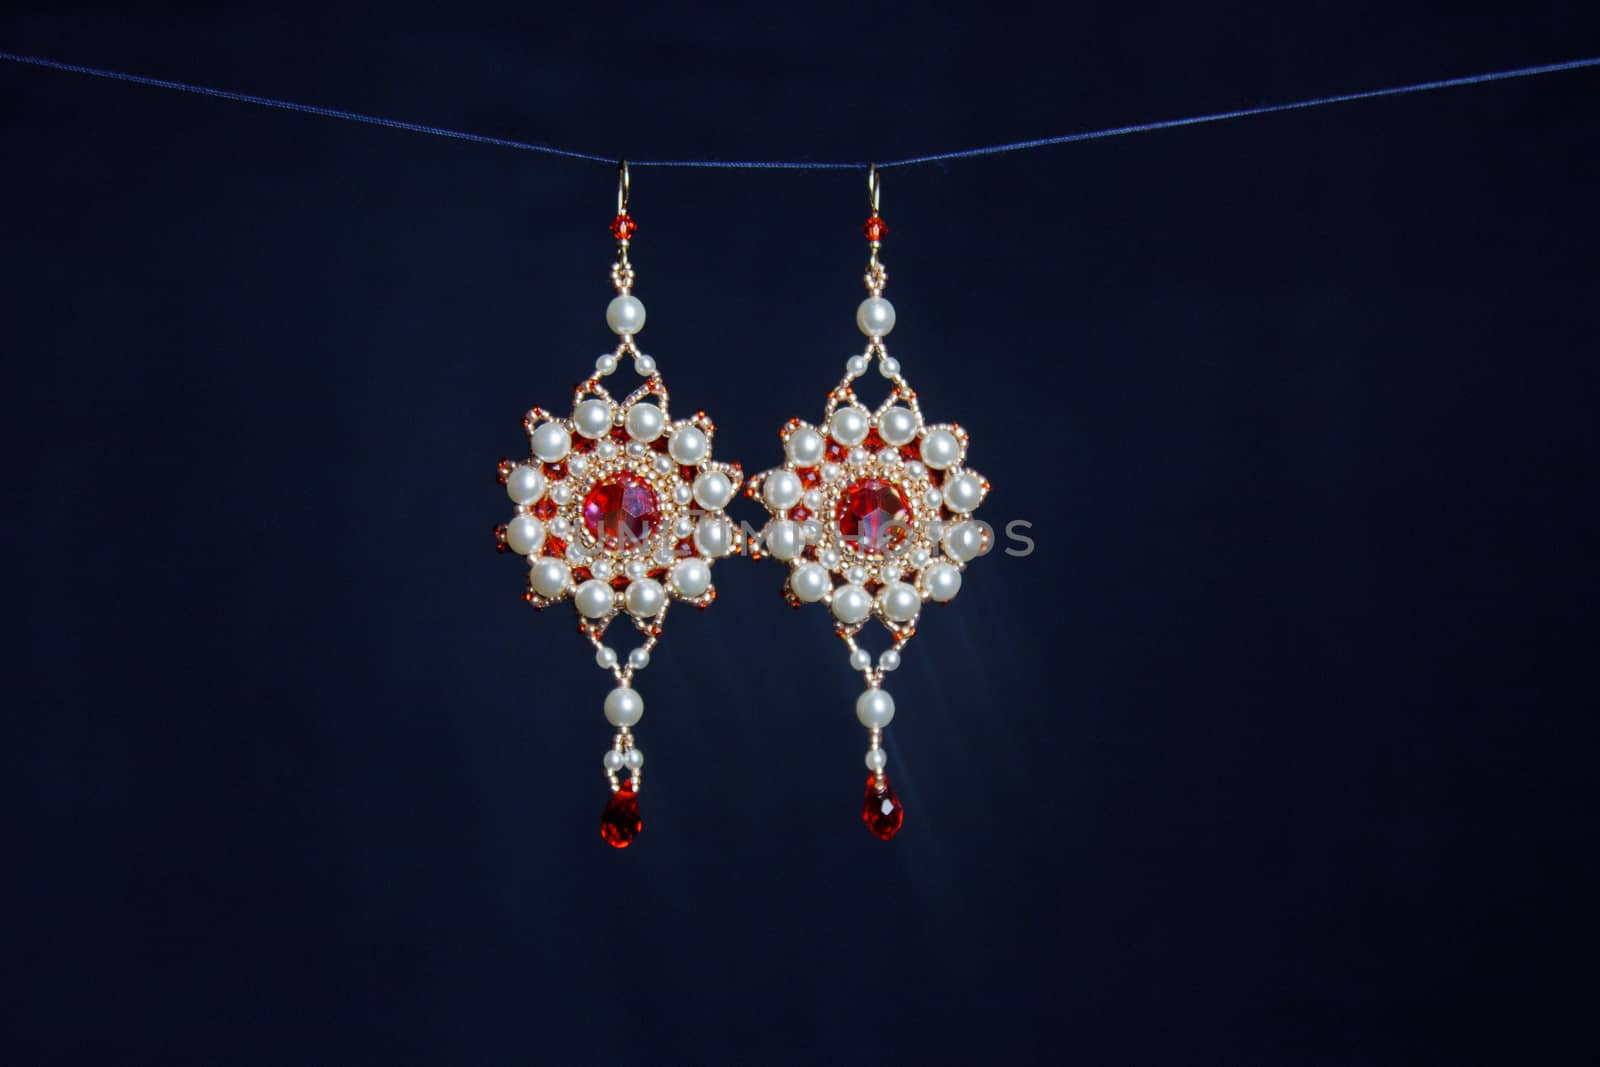 handmade jewelry made of beads in macro. earrings from white beads. earrings from stones. beautiful ornaments. earrings from red beads. ornaments on a black background by yulaphotographer